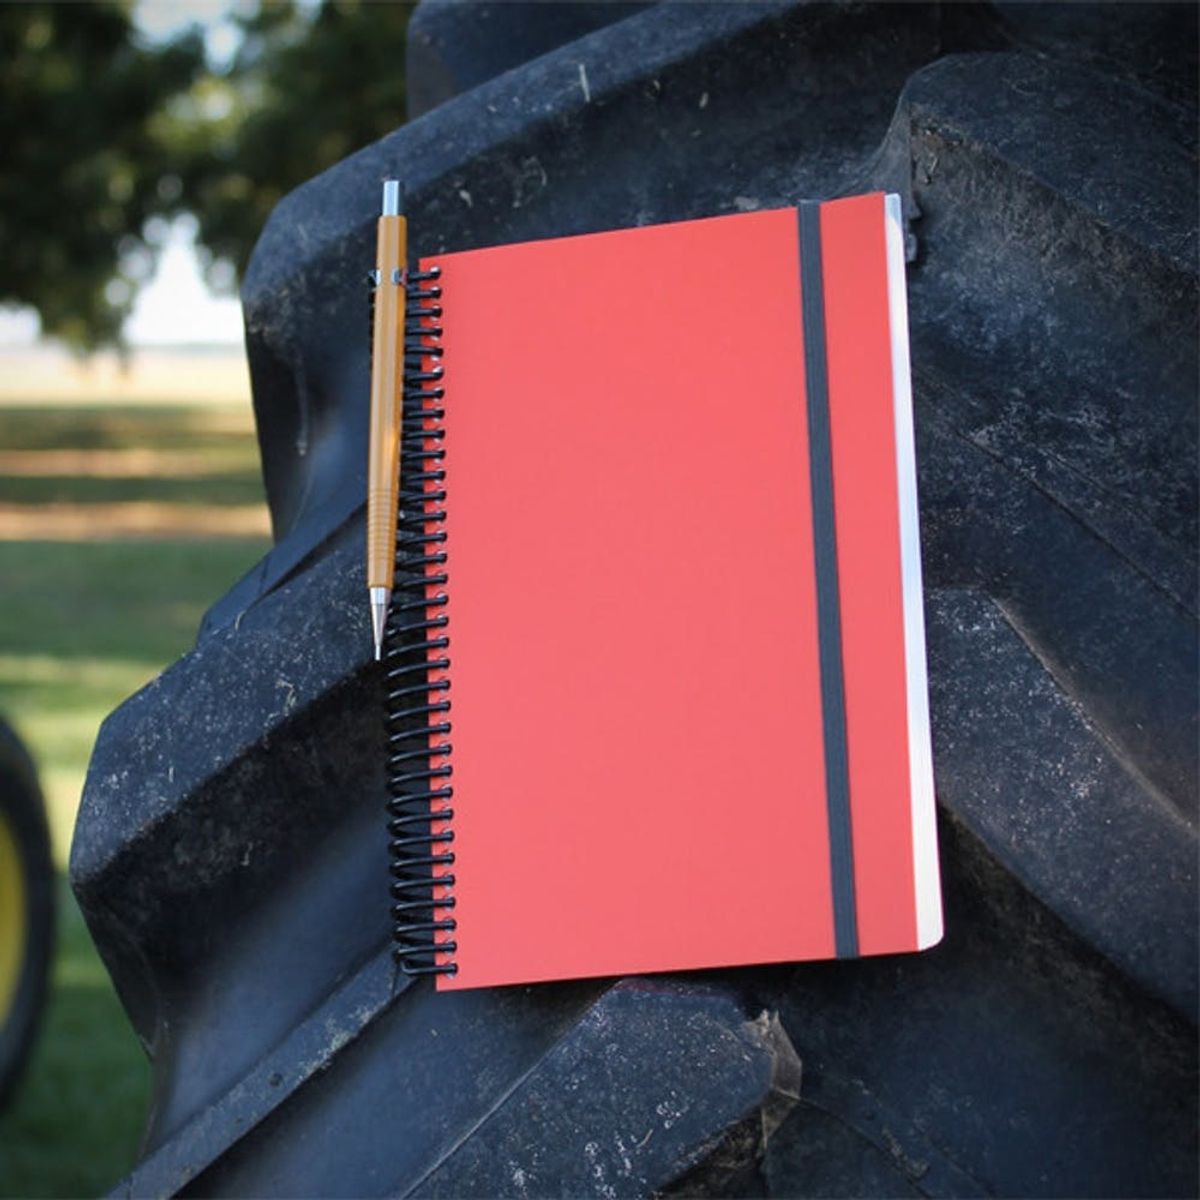 Take Notes Underwater With *This* Waterproof Notebook!